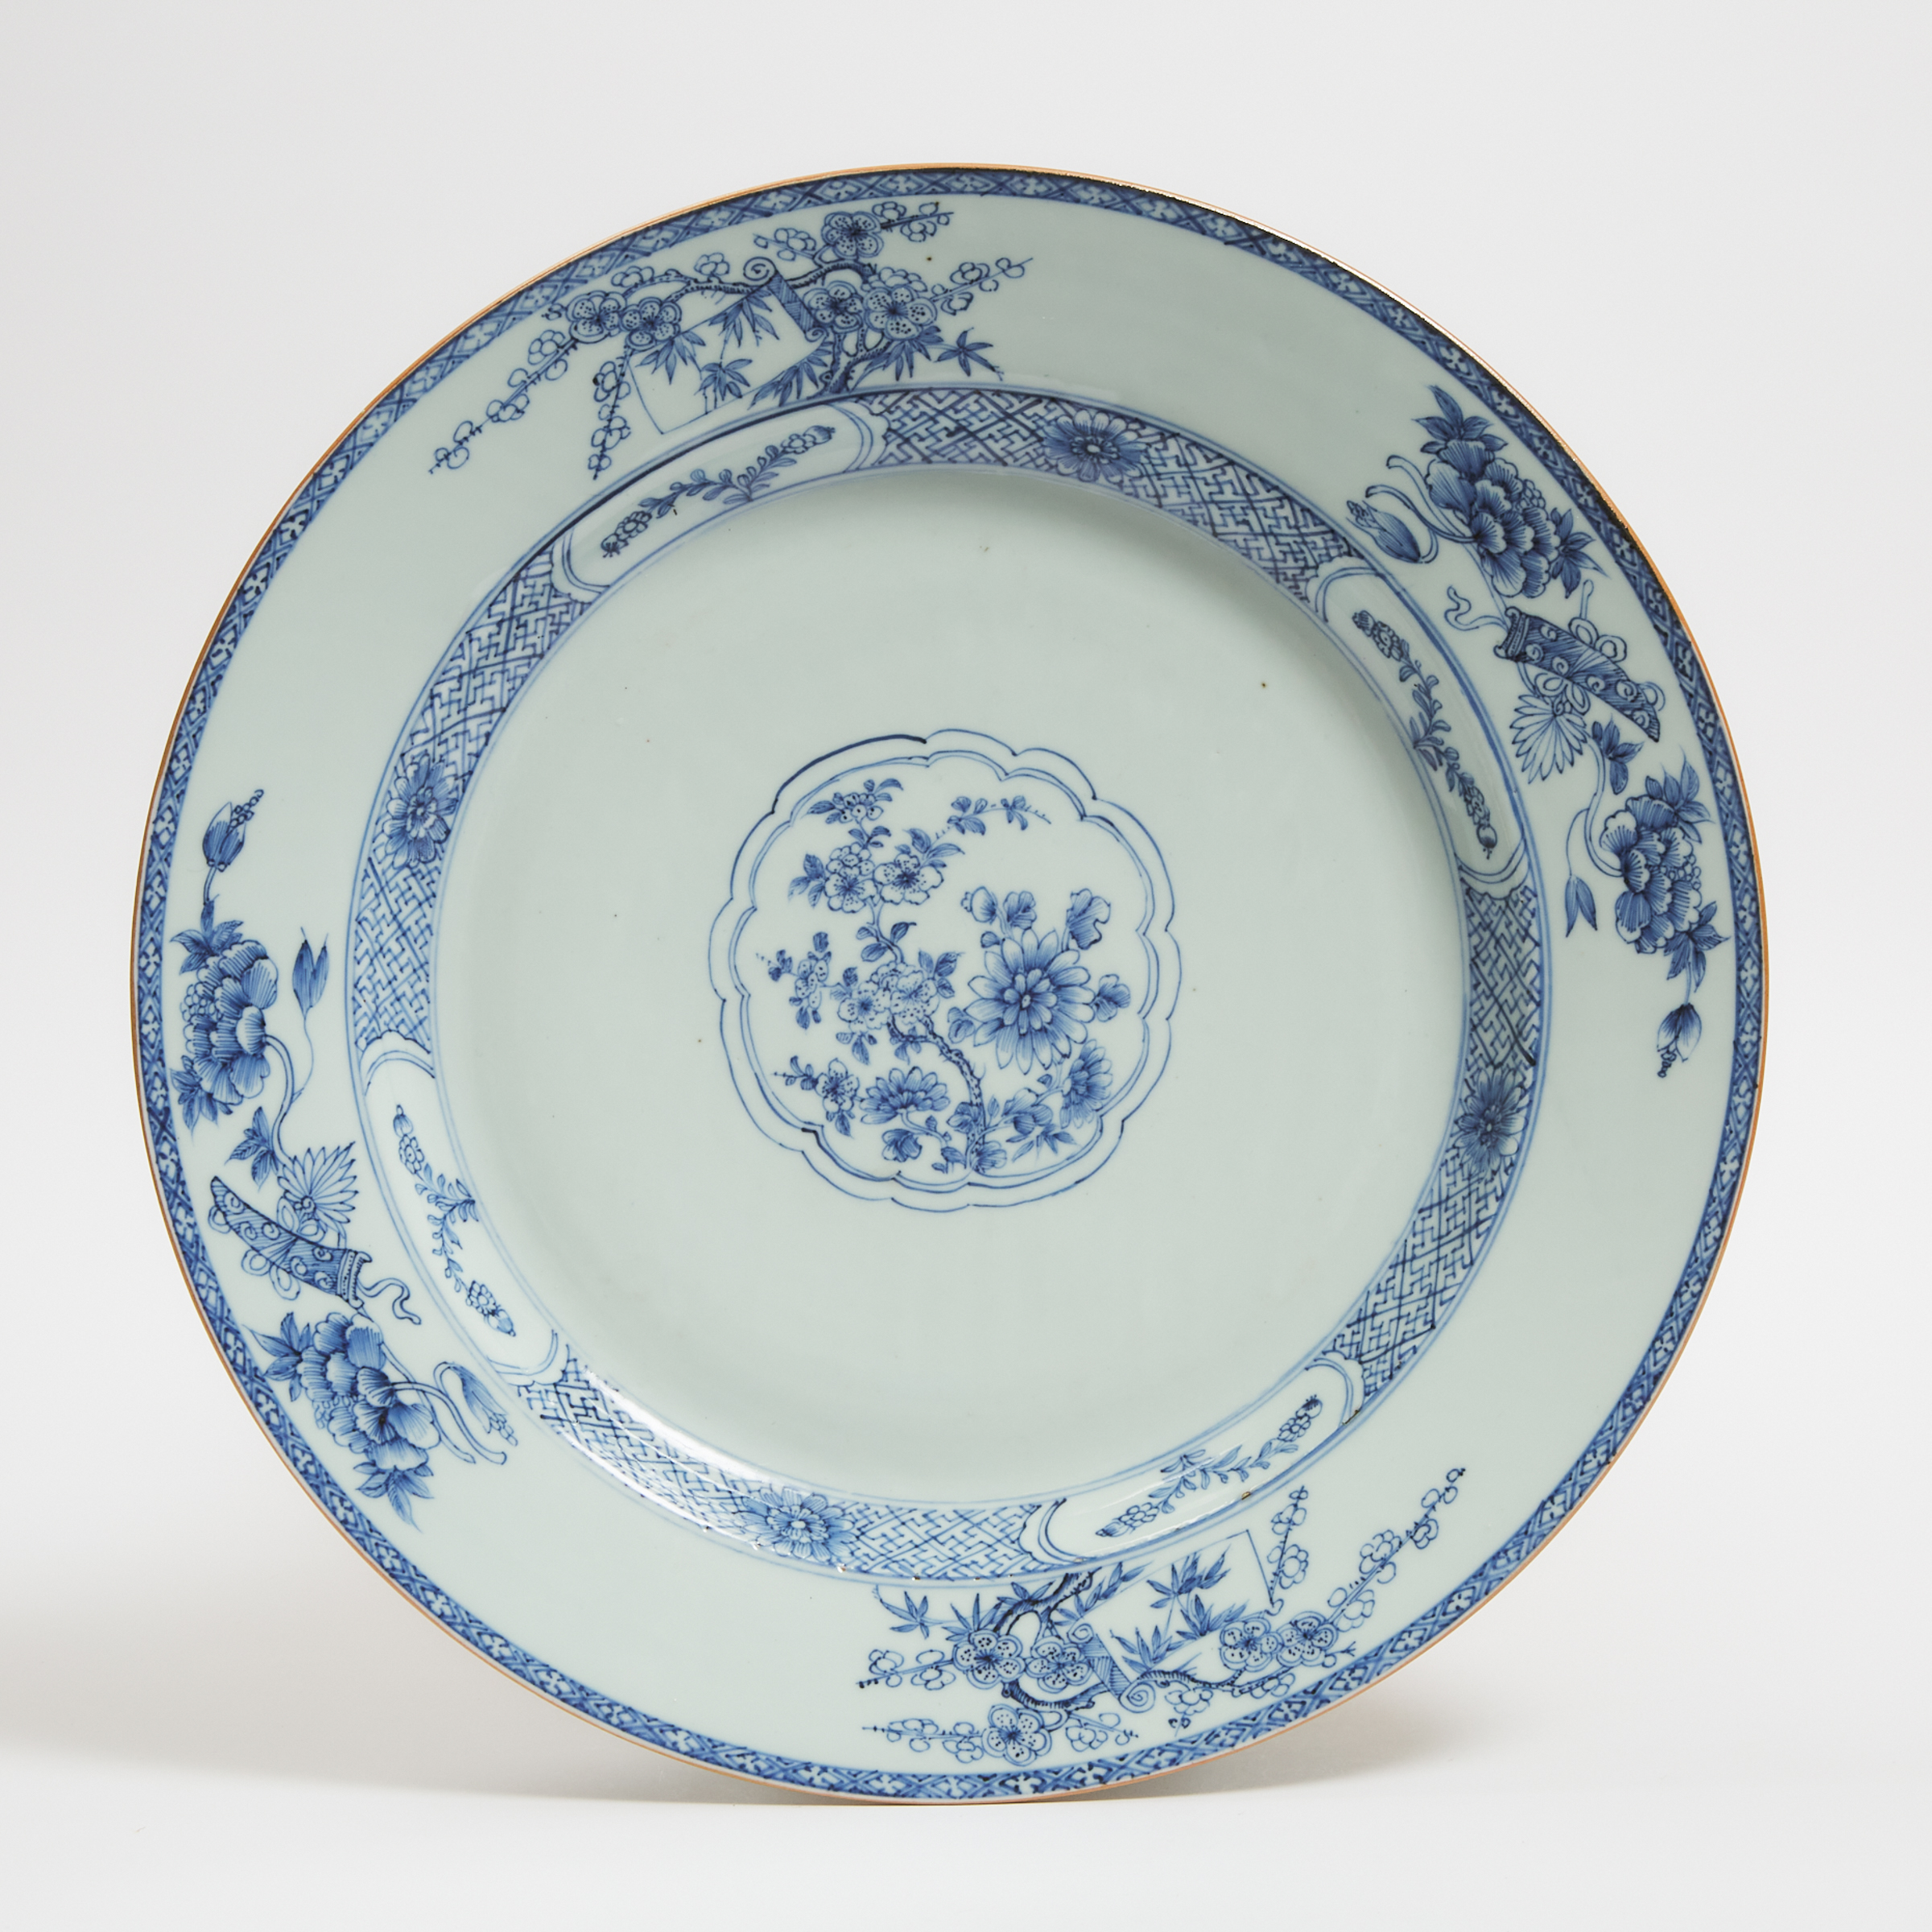 A Chinese Export Blue and White 'Floral' Charger, Yongzheng Period (1723-1735)